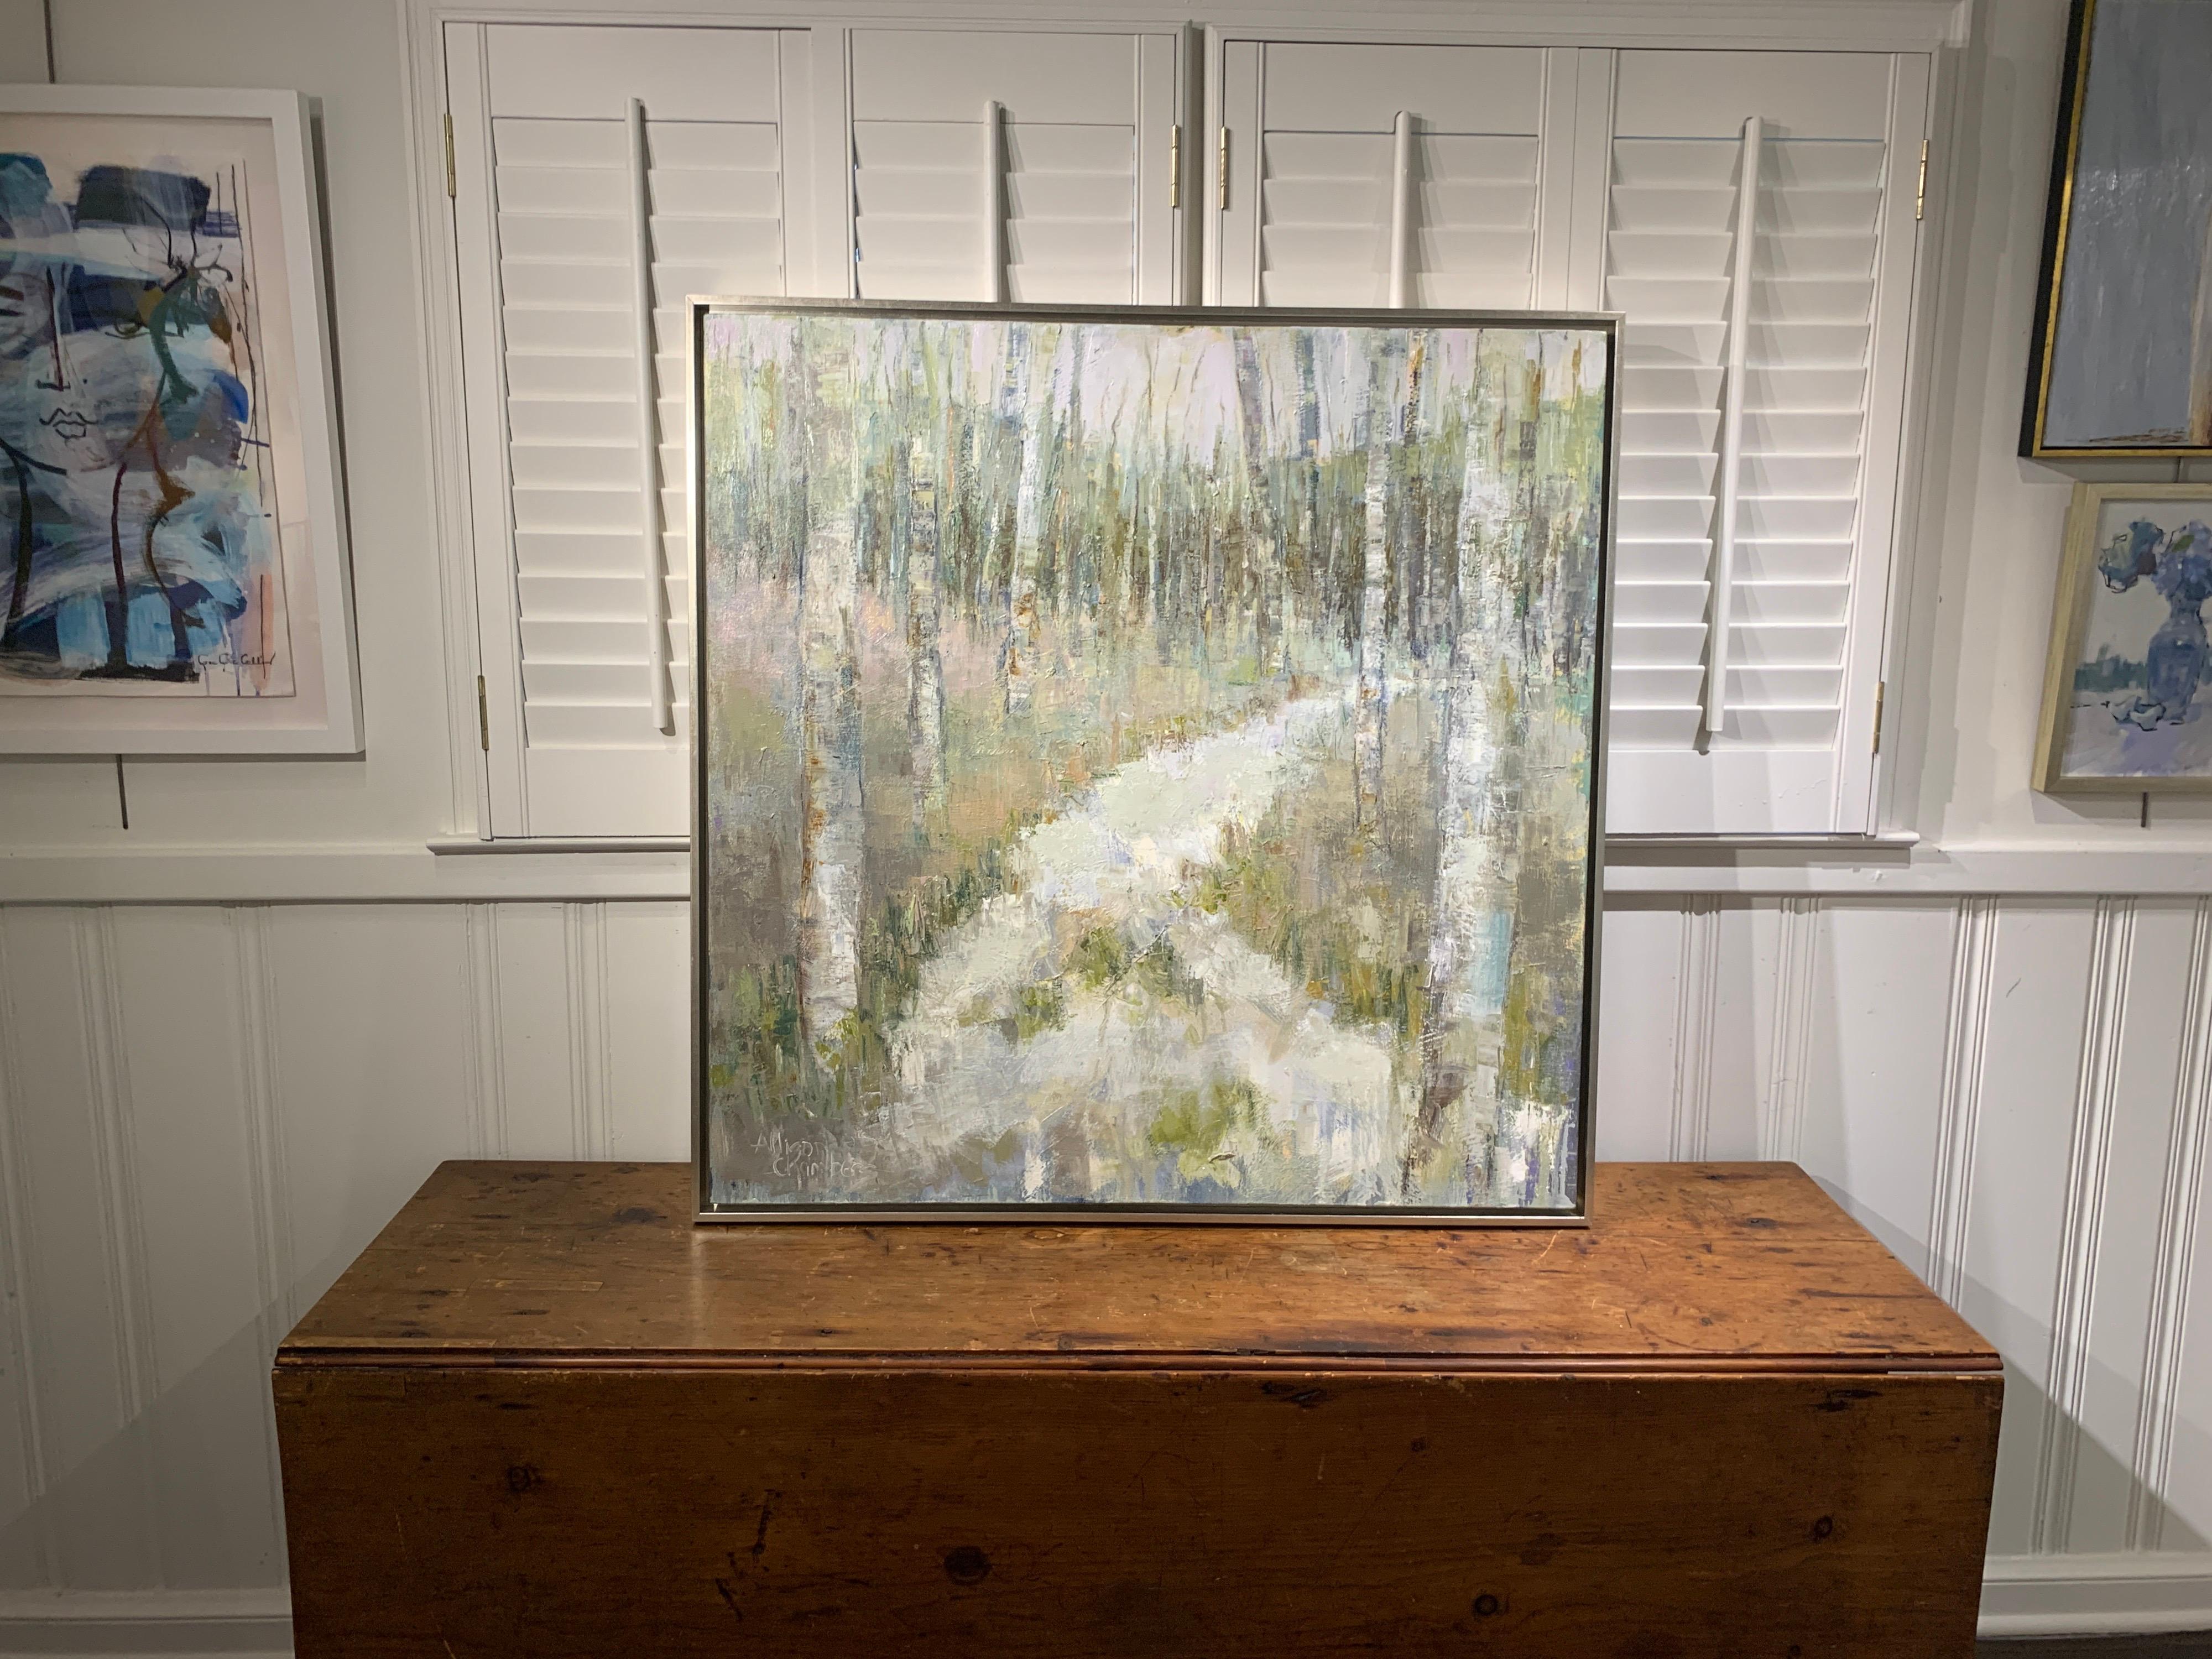 'Deep Roots 2' is a framed landscape oil on canvas painting of medium size, created by American artist Allison Chambers in 2020. Featuring birch trees in a palette made of a variety of colors such as blue, green, brown, purple and grey among others,